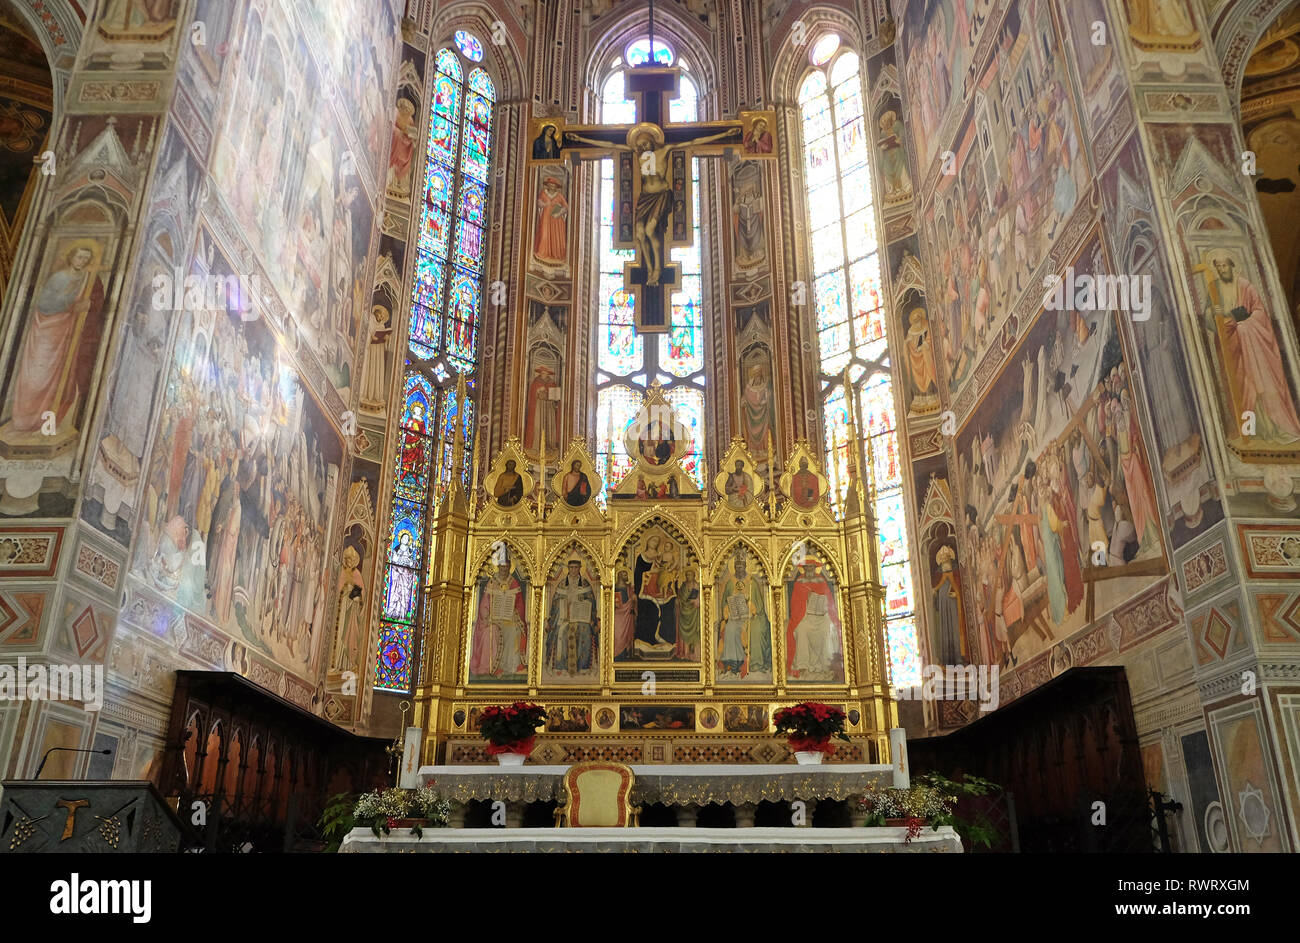 High altar in the Basilica di Santa Croce (Basilica of the Holy Cross) - famous Franciscan church in Florence, Italy Stock Photo